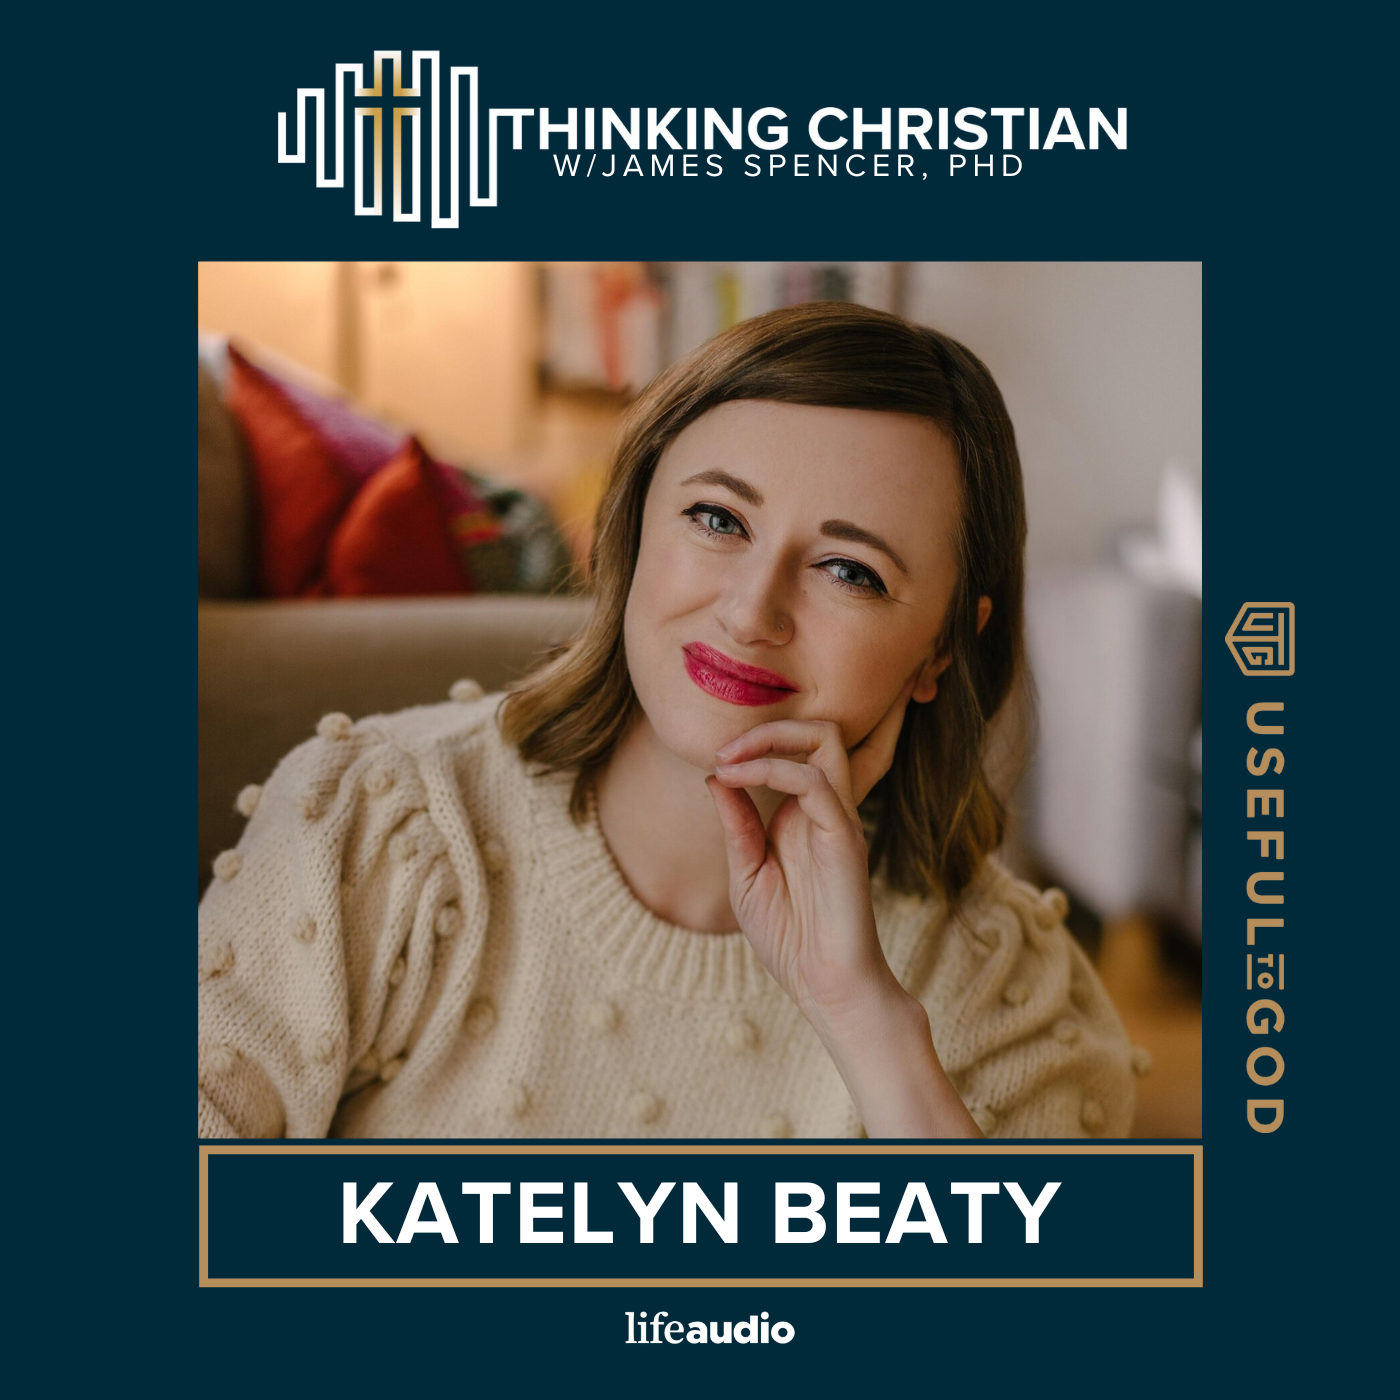 How Should Christians think about the "Bro Code": A Conversation with Katelyn Beaty